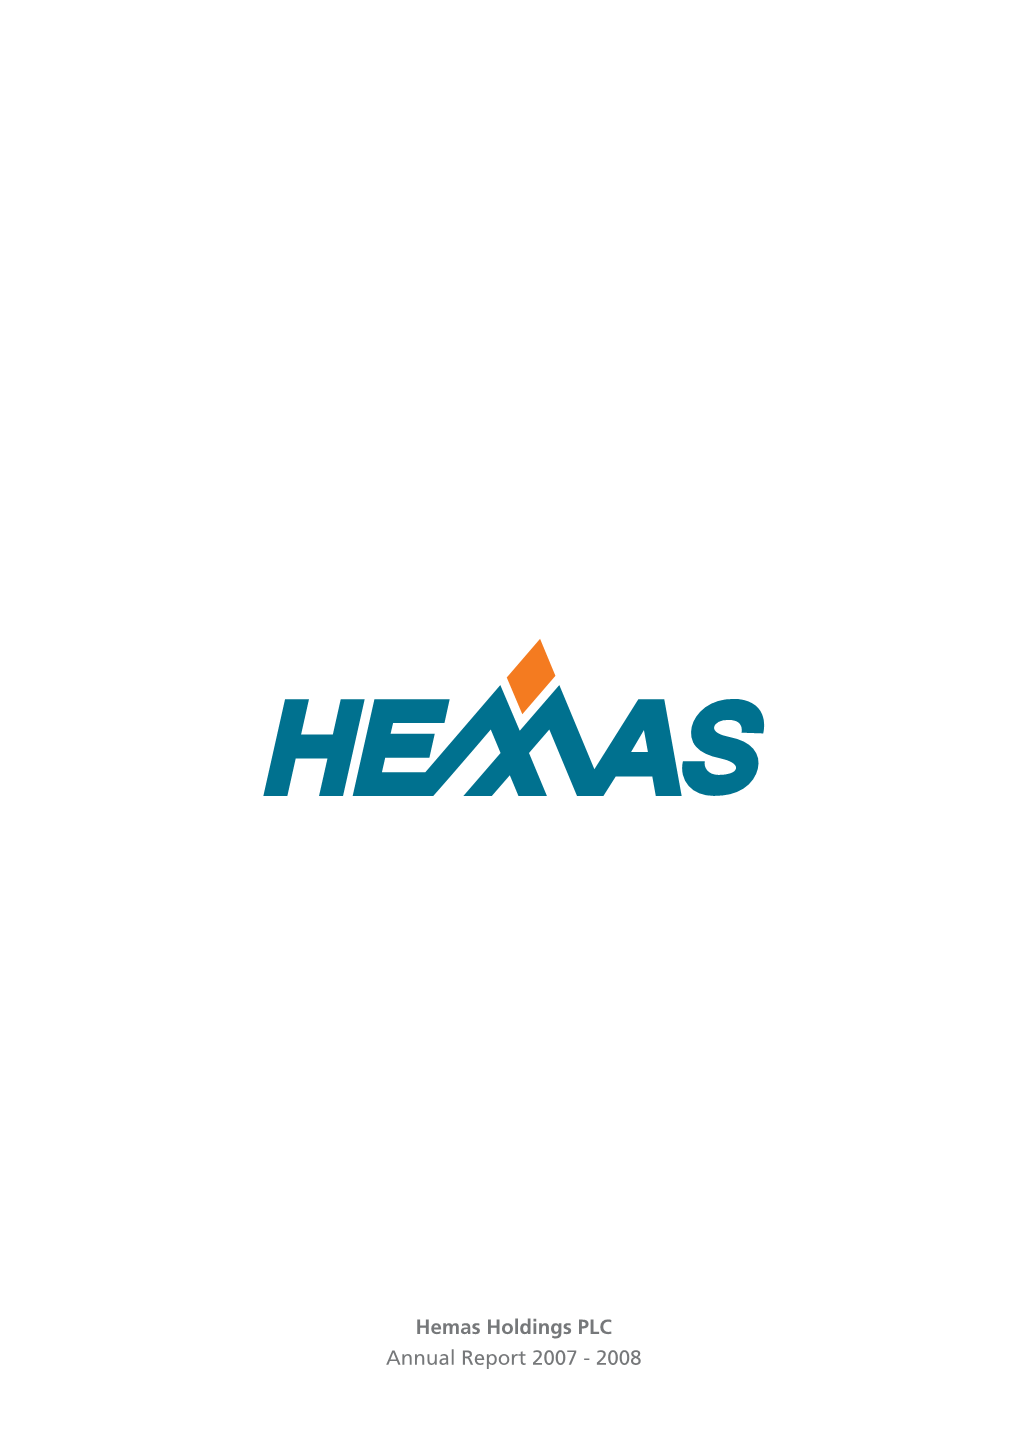 Hemas Holdings PLC Annual Report 2007 - 2008 Contents